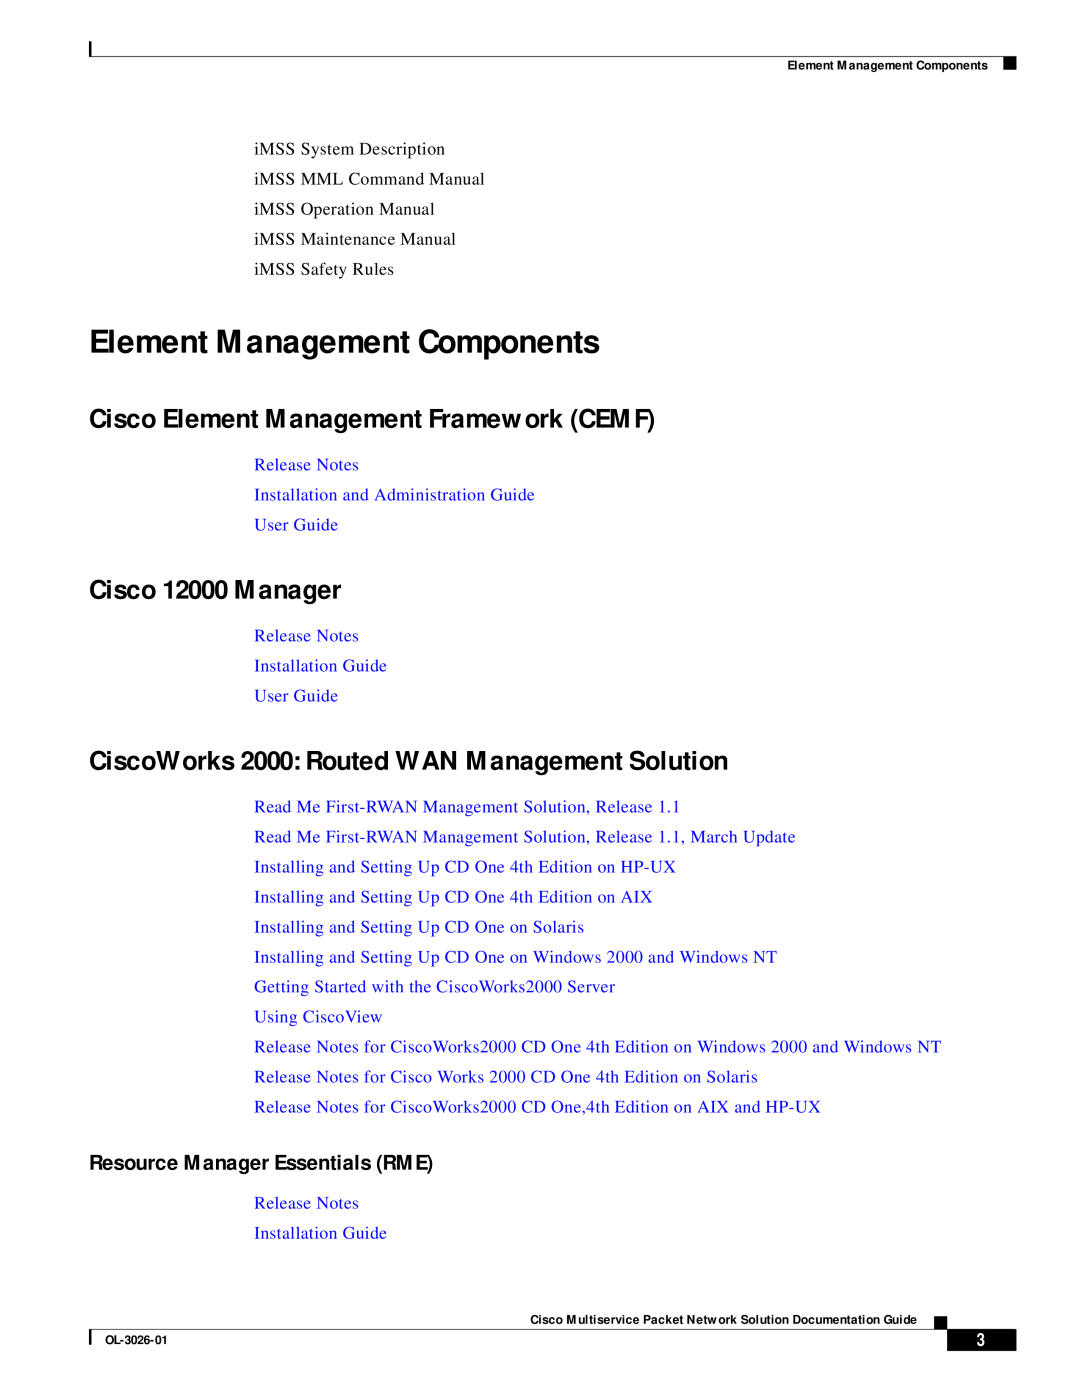 Cisco Systems OL-3026-01 manual Element Management Components, Cisco Element Management Framework CEMF, Cisco 12000 Manager 